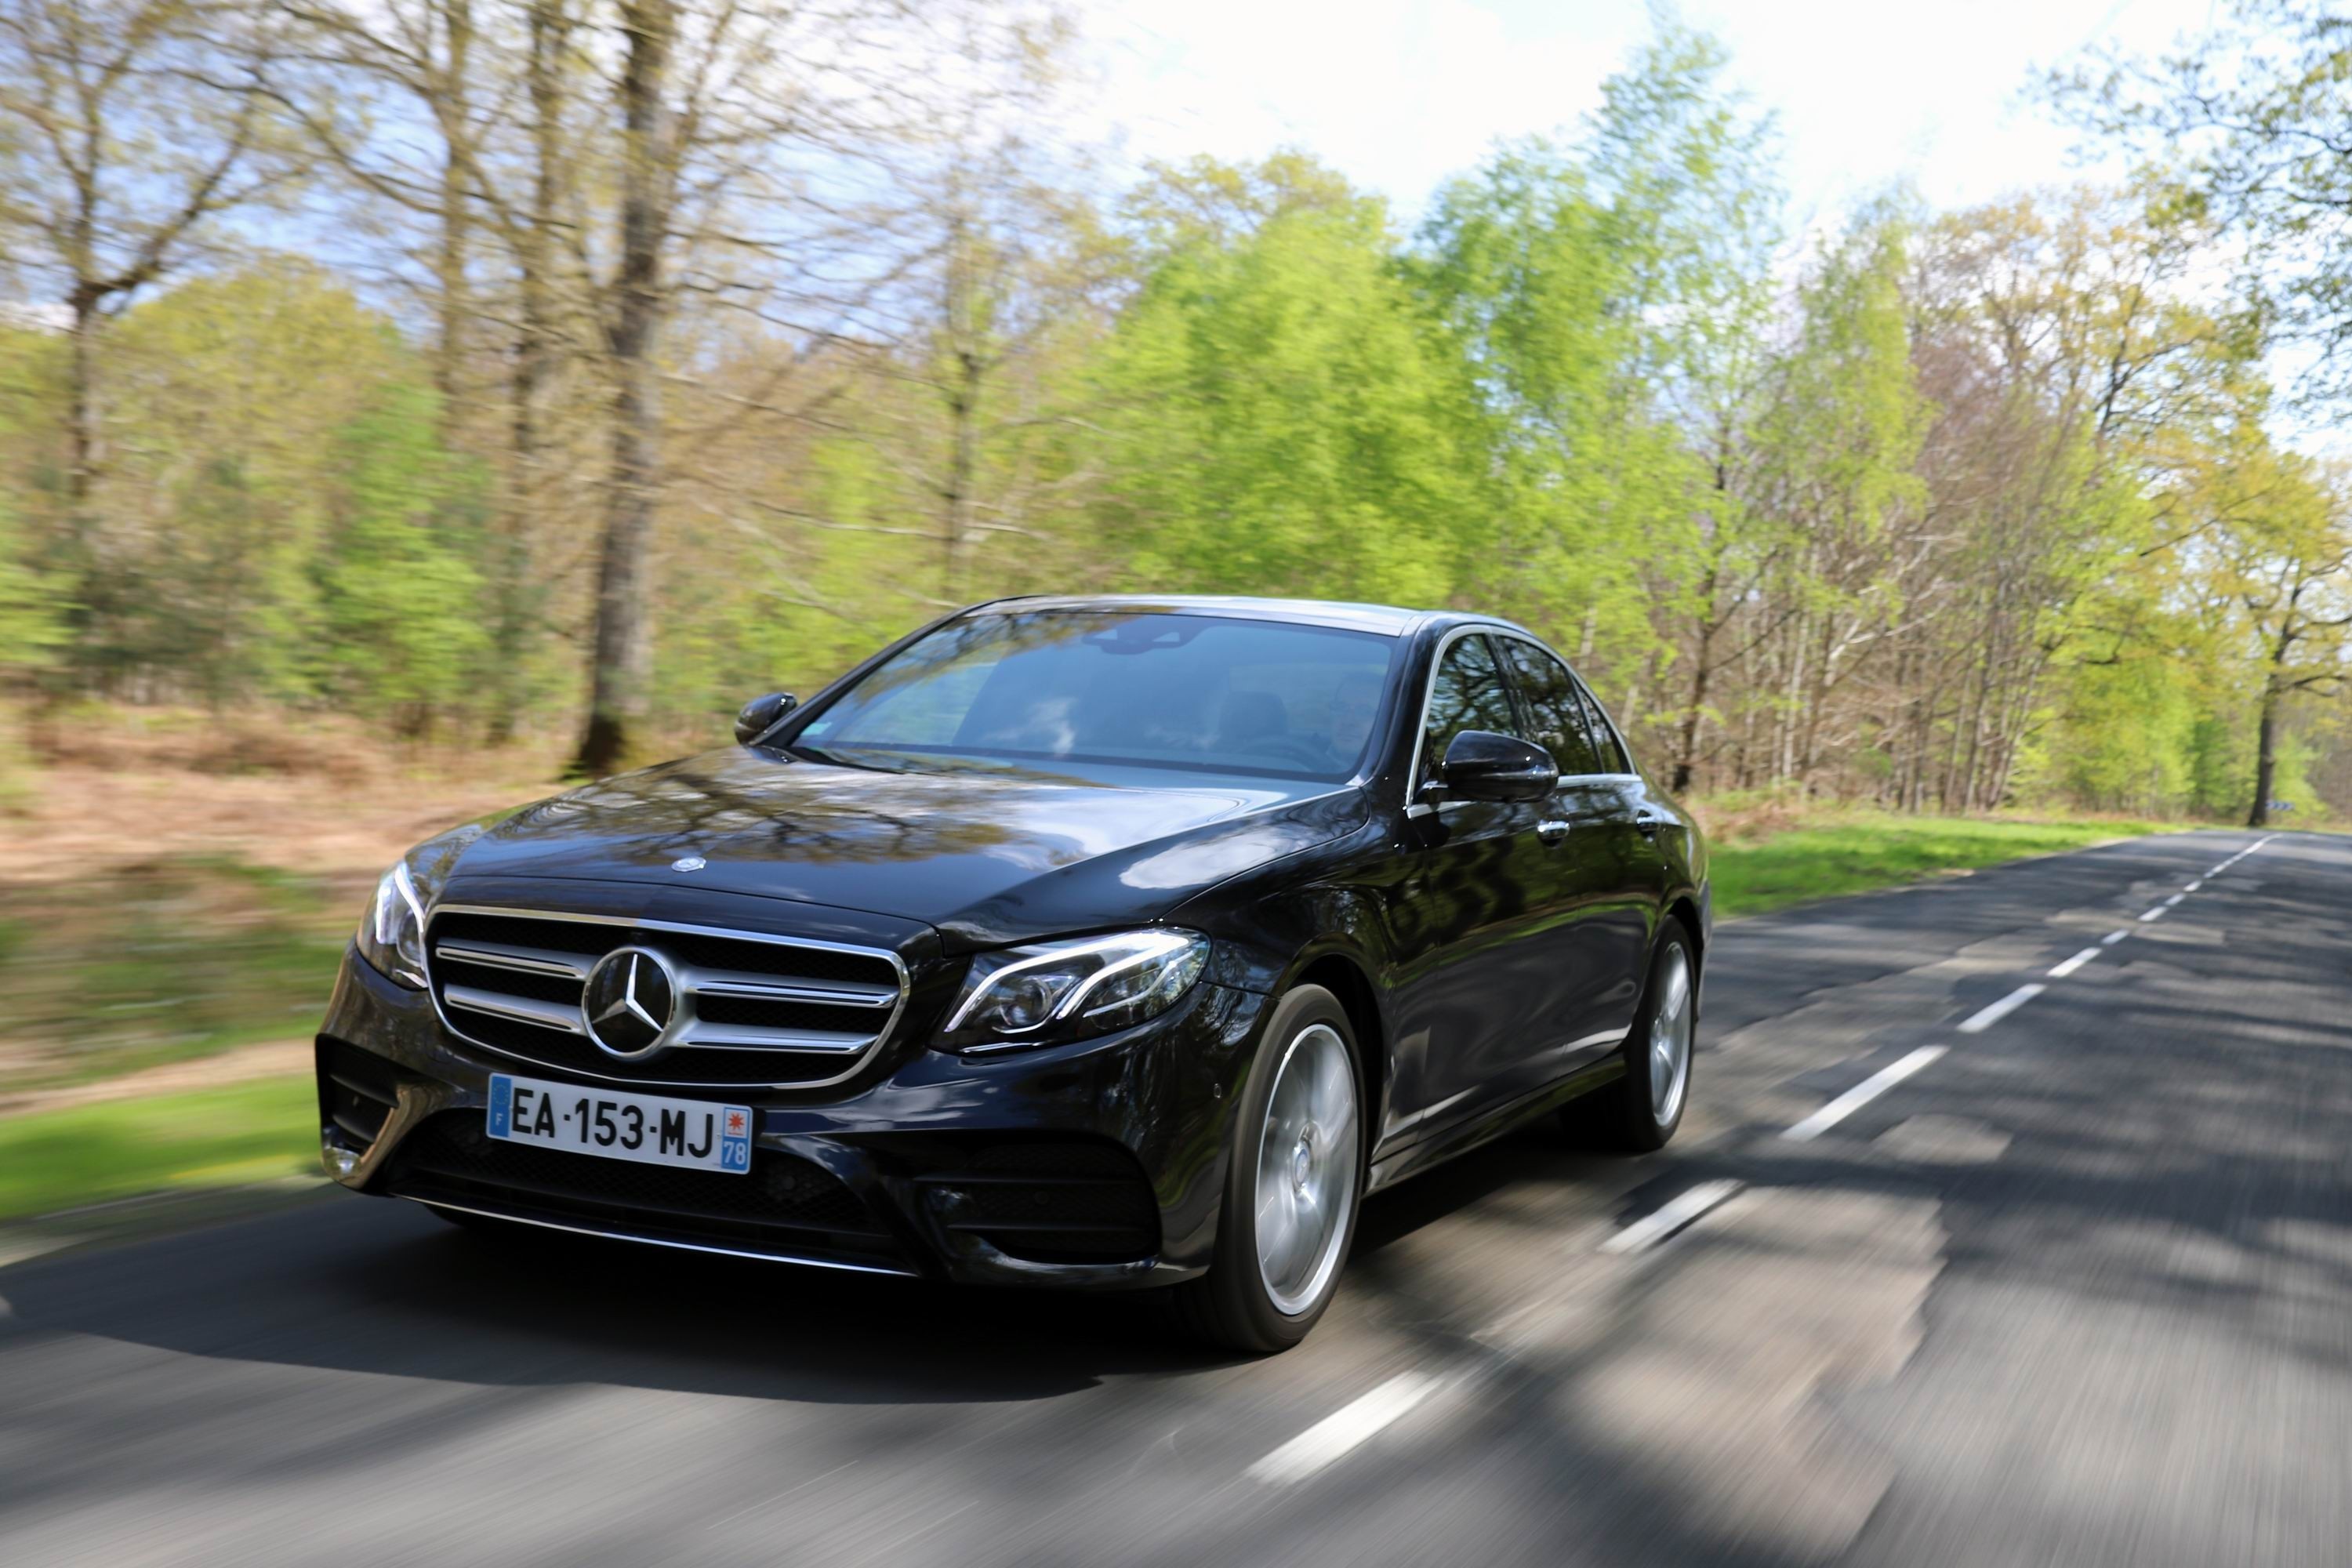 Mercedes E-Class T-Modell (S213) accessories specifications